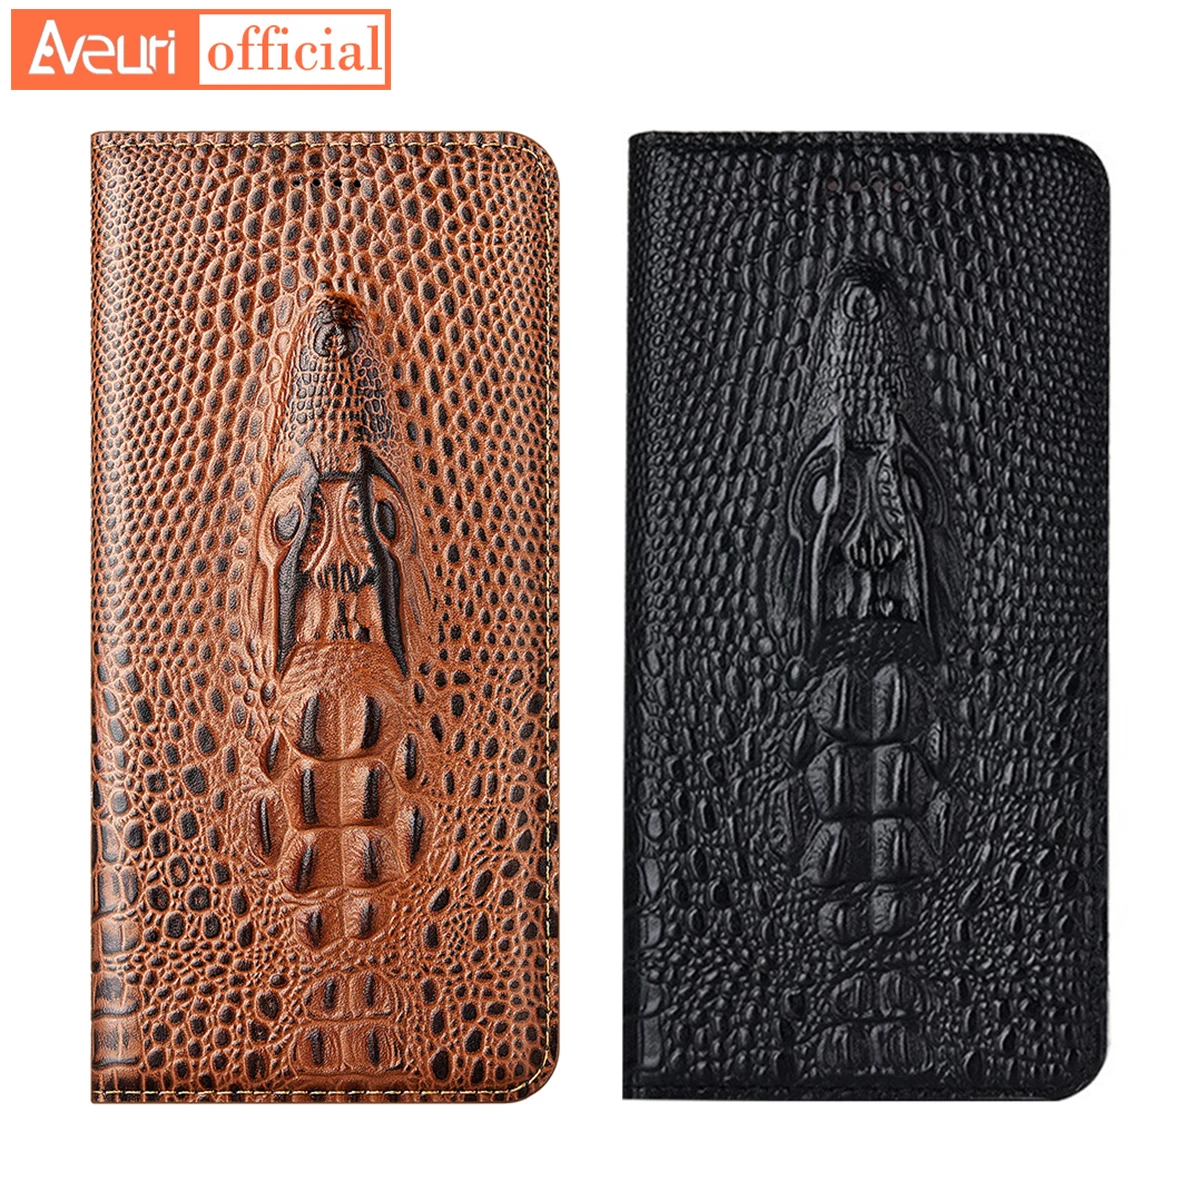 

Luxury Genuine Leather Flip Phone Case For Google Pixel 7 Pro 6 Pro 5 2 3 4 3A XL 4A 5A 6A 5G Crocodile Style Cover Case Coque